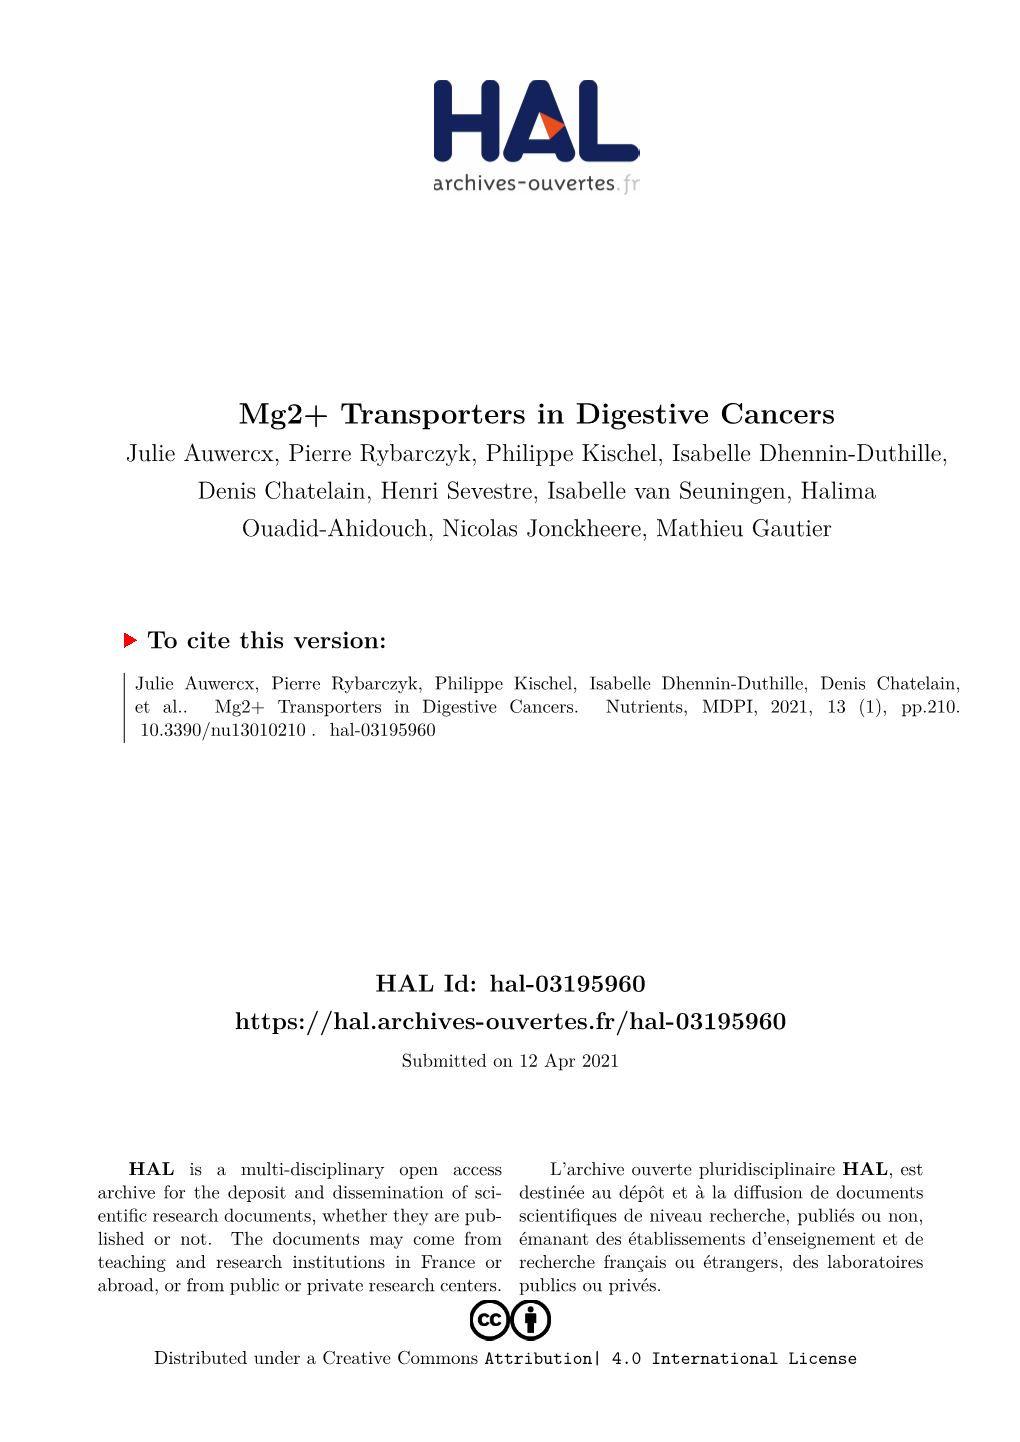 Mg2+ Transporters in Digestive Cancers